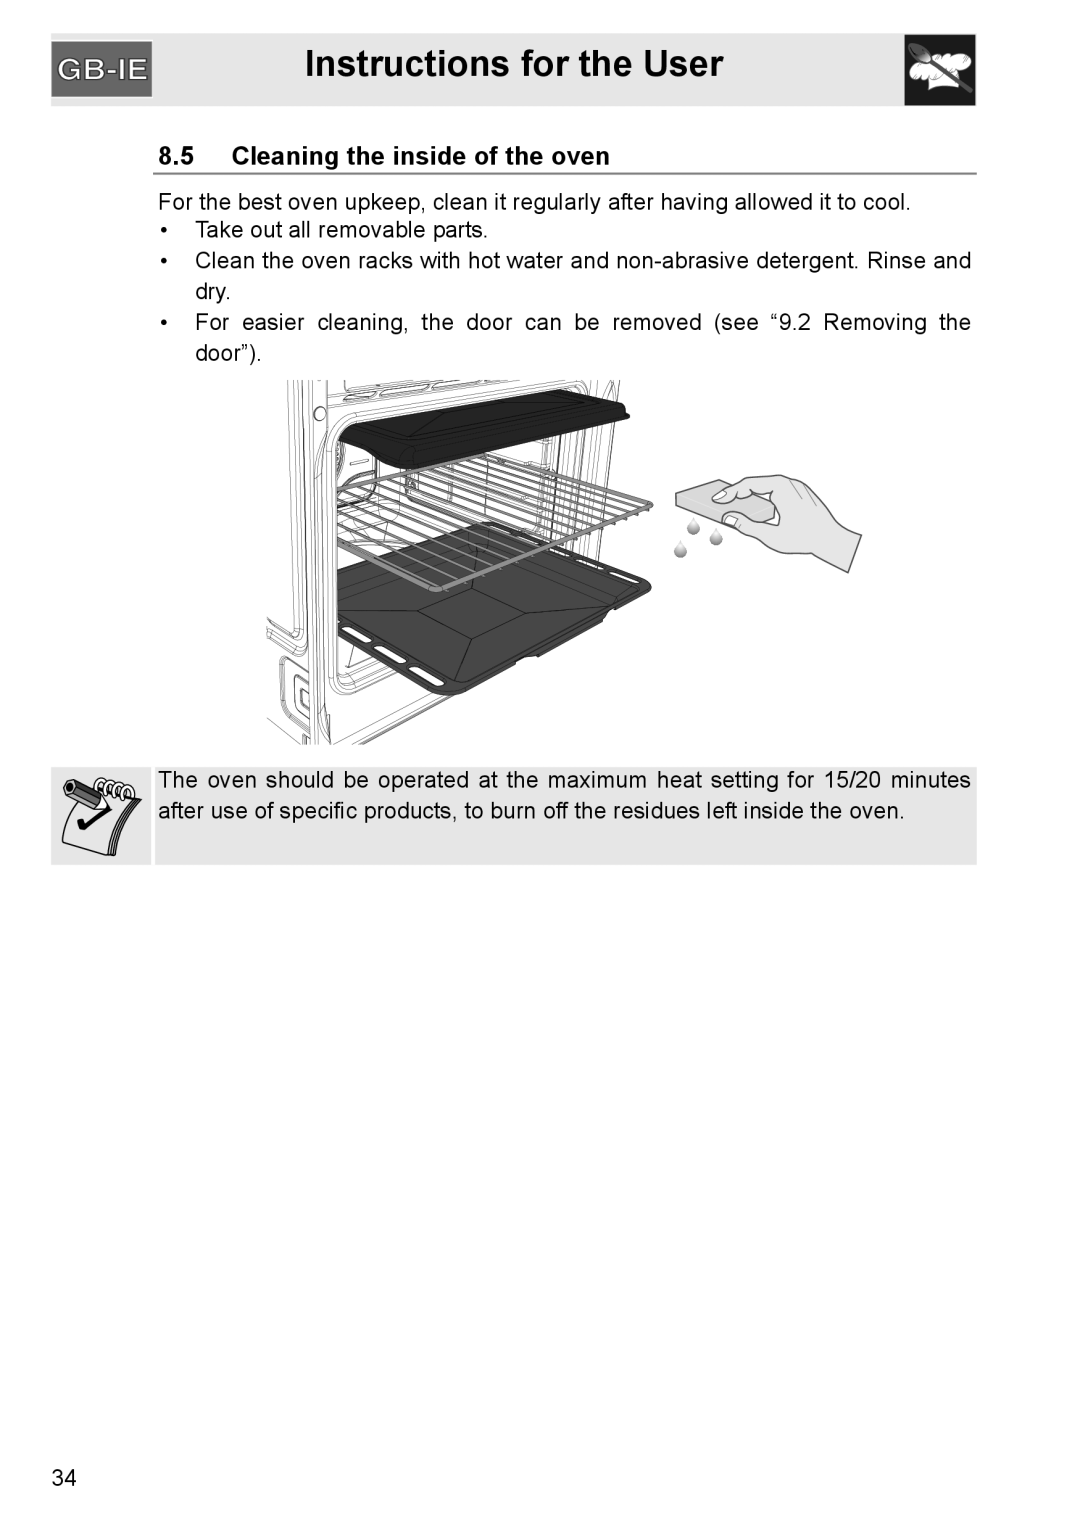 GE SA304X-8 manual 8.5Cleaning the inside of the oven, Instructions for the User 